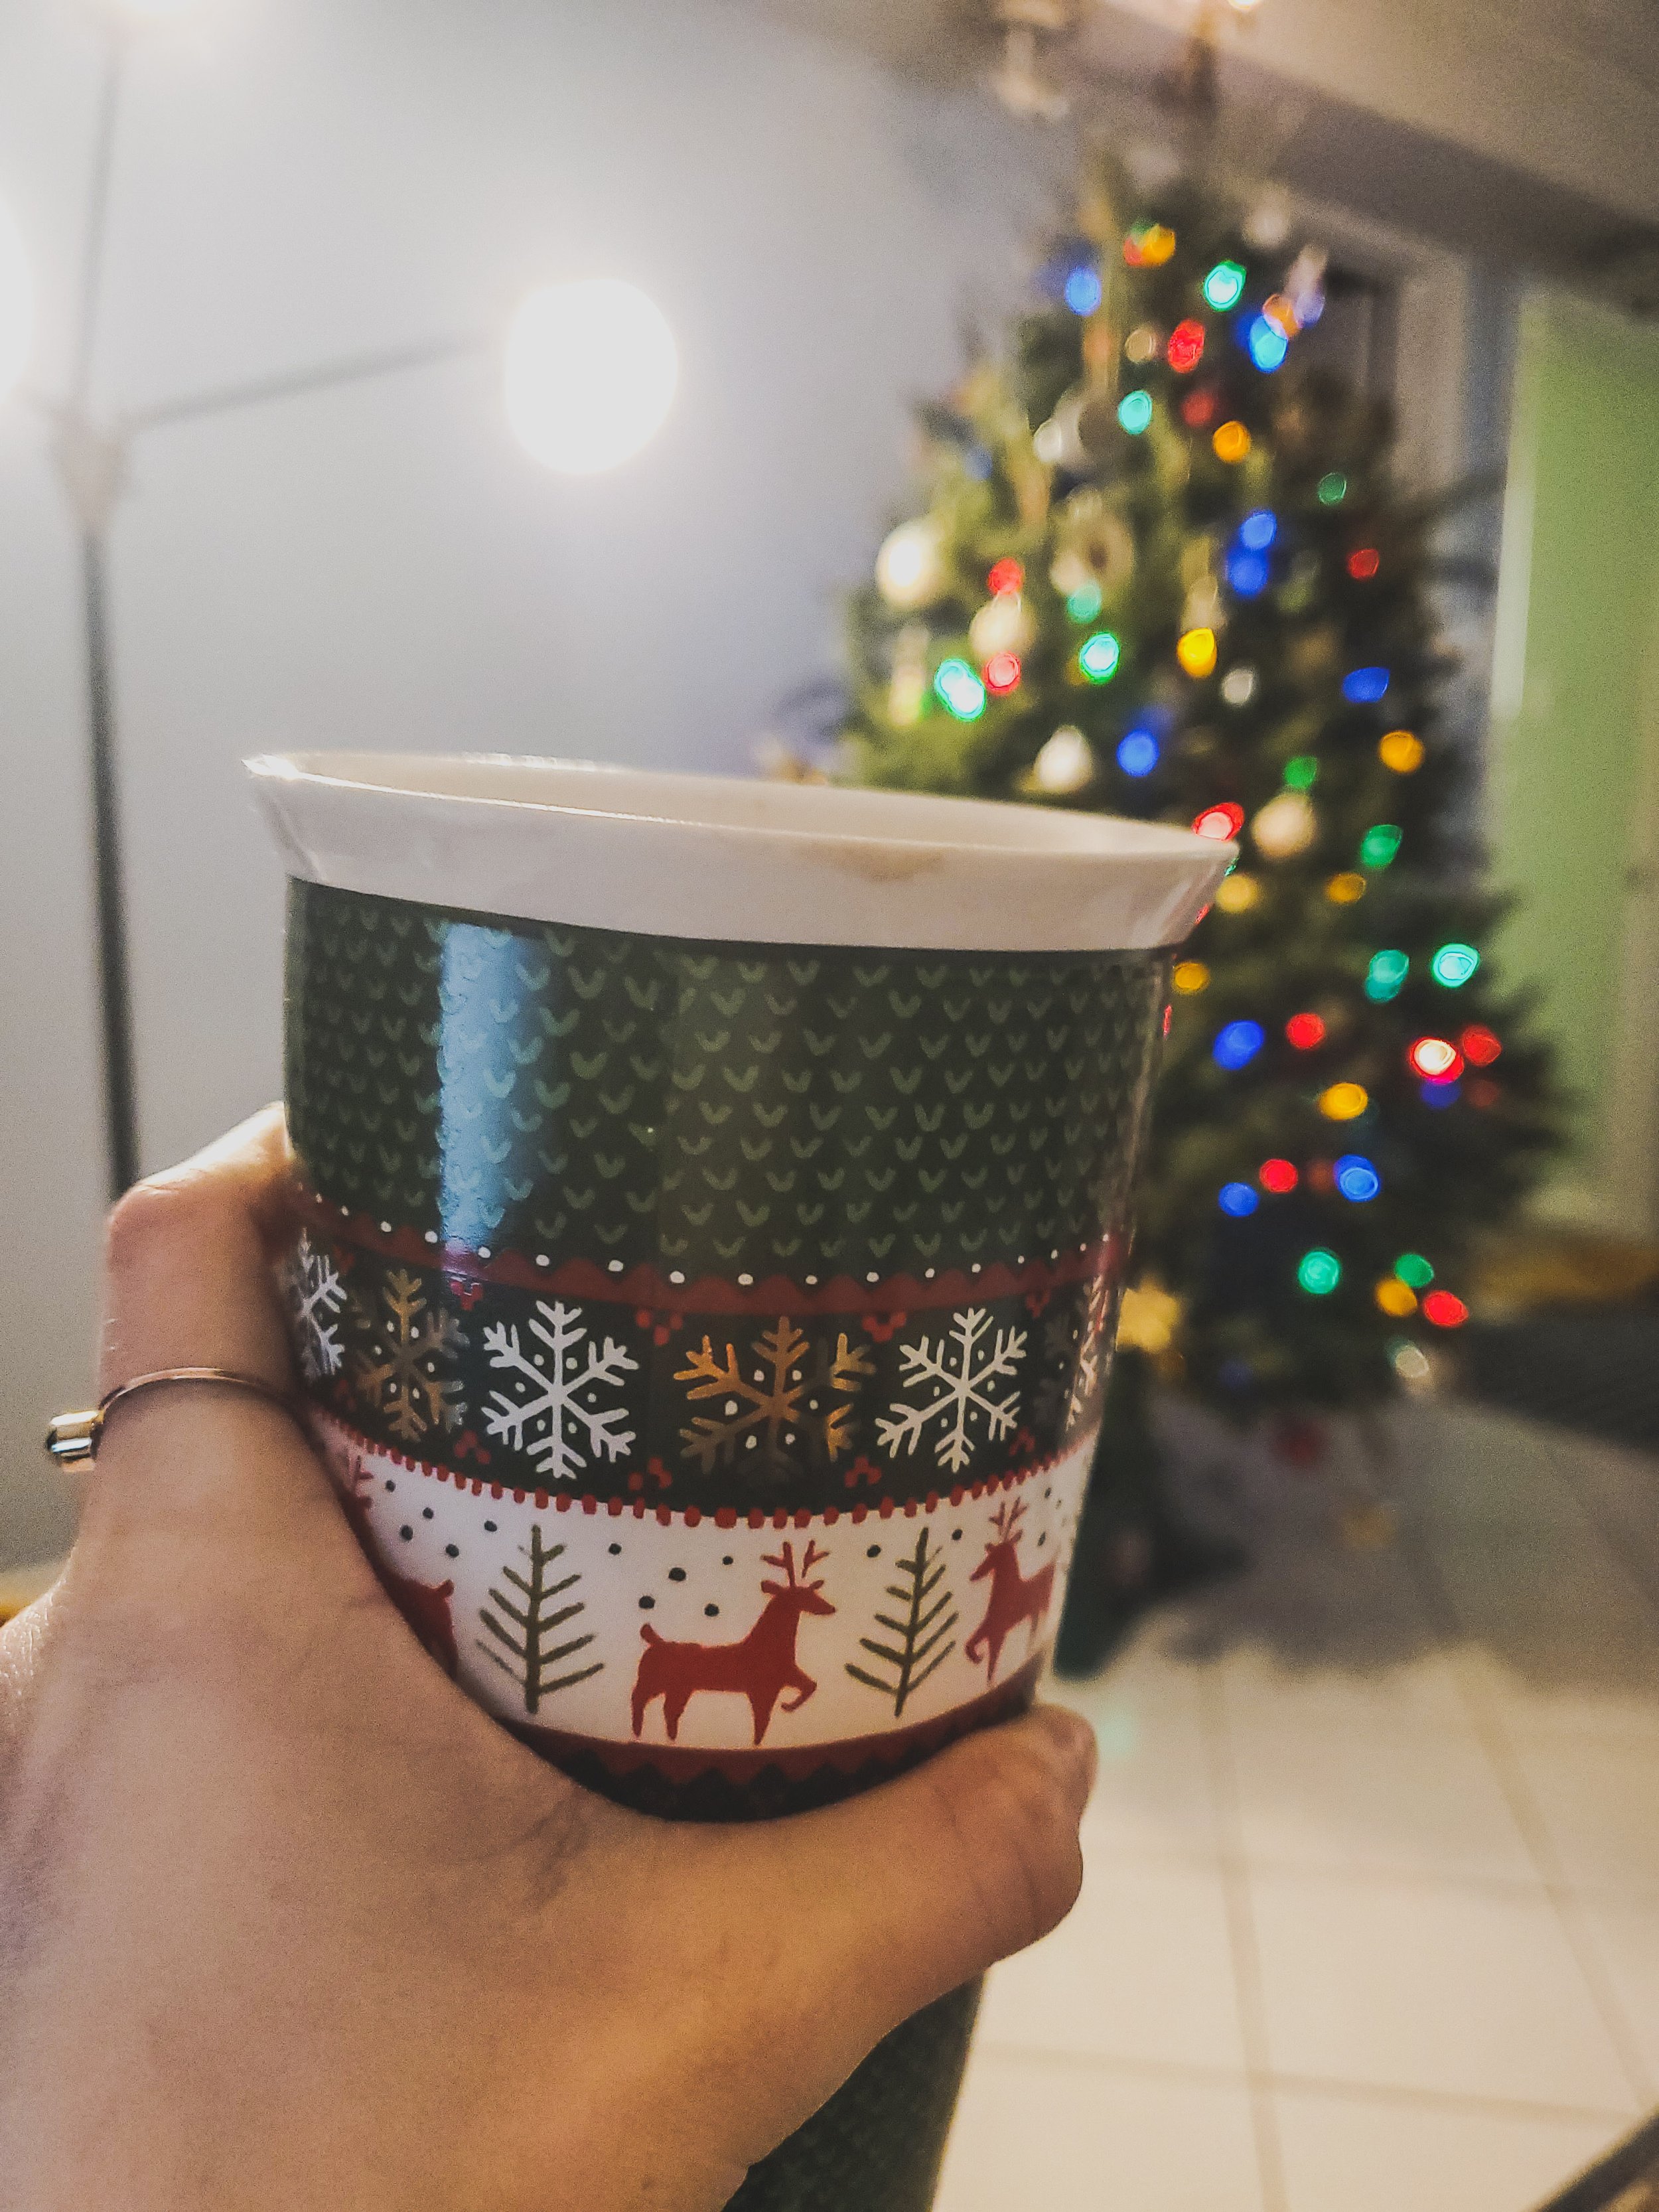  Prepping for an intense therapy session with a homemade mocha in a Christmas mug. 